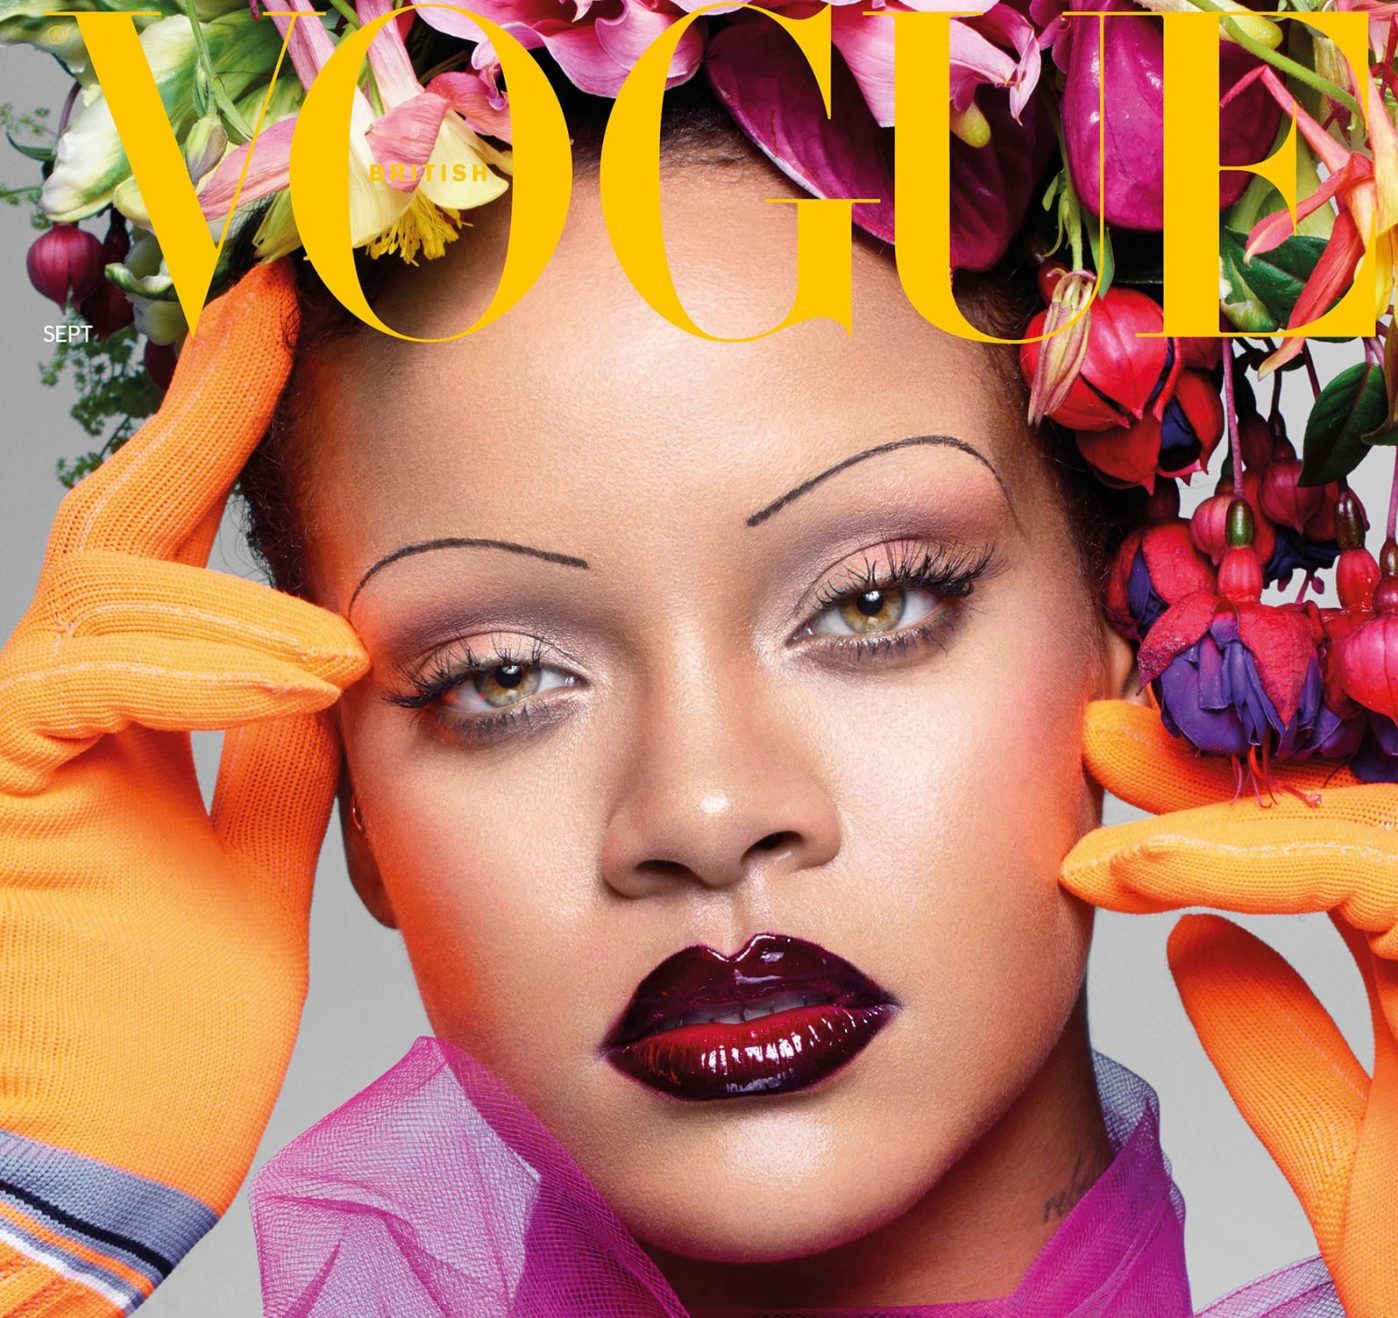 Rihanna on the cover of Vogue magazine 2018